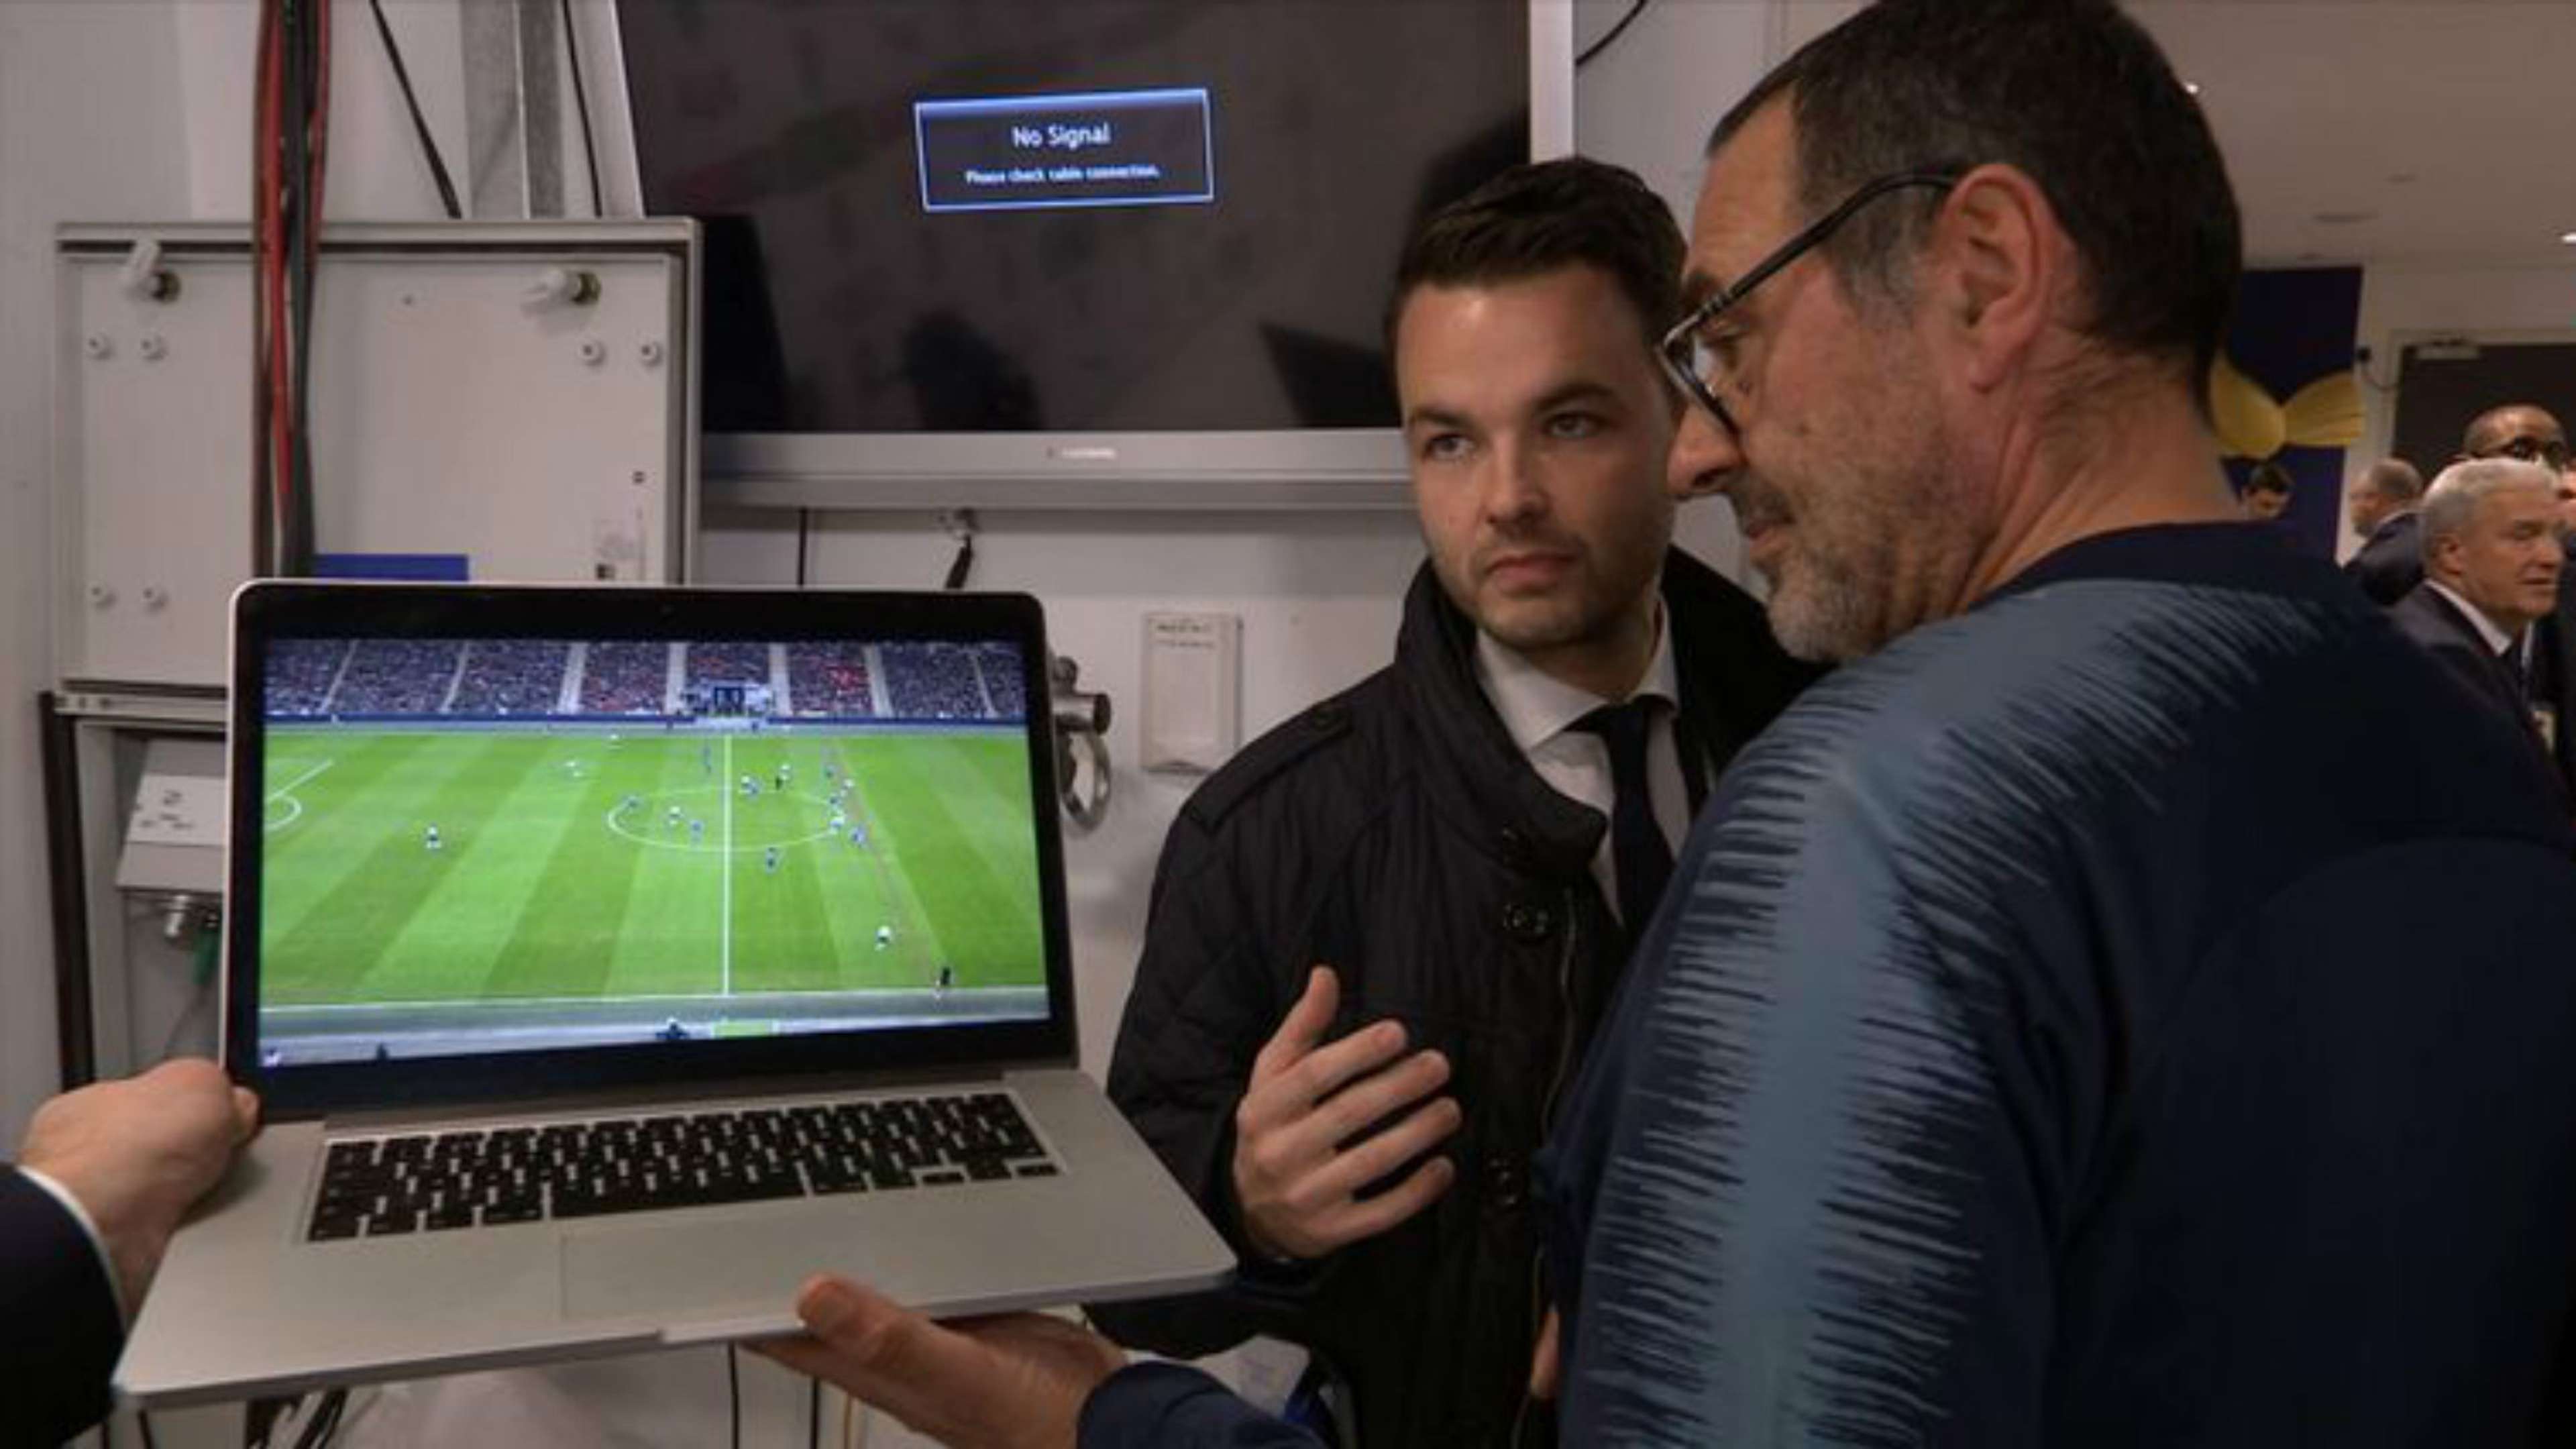 EMBED ONLY Maurizio Sarri Chelsea laptop